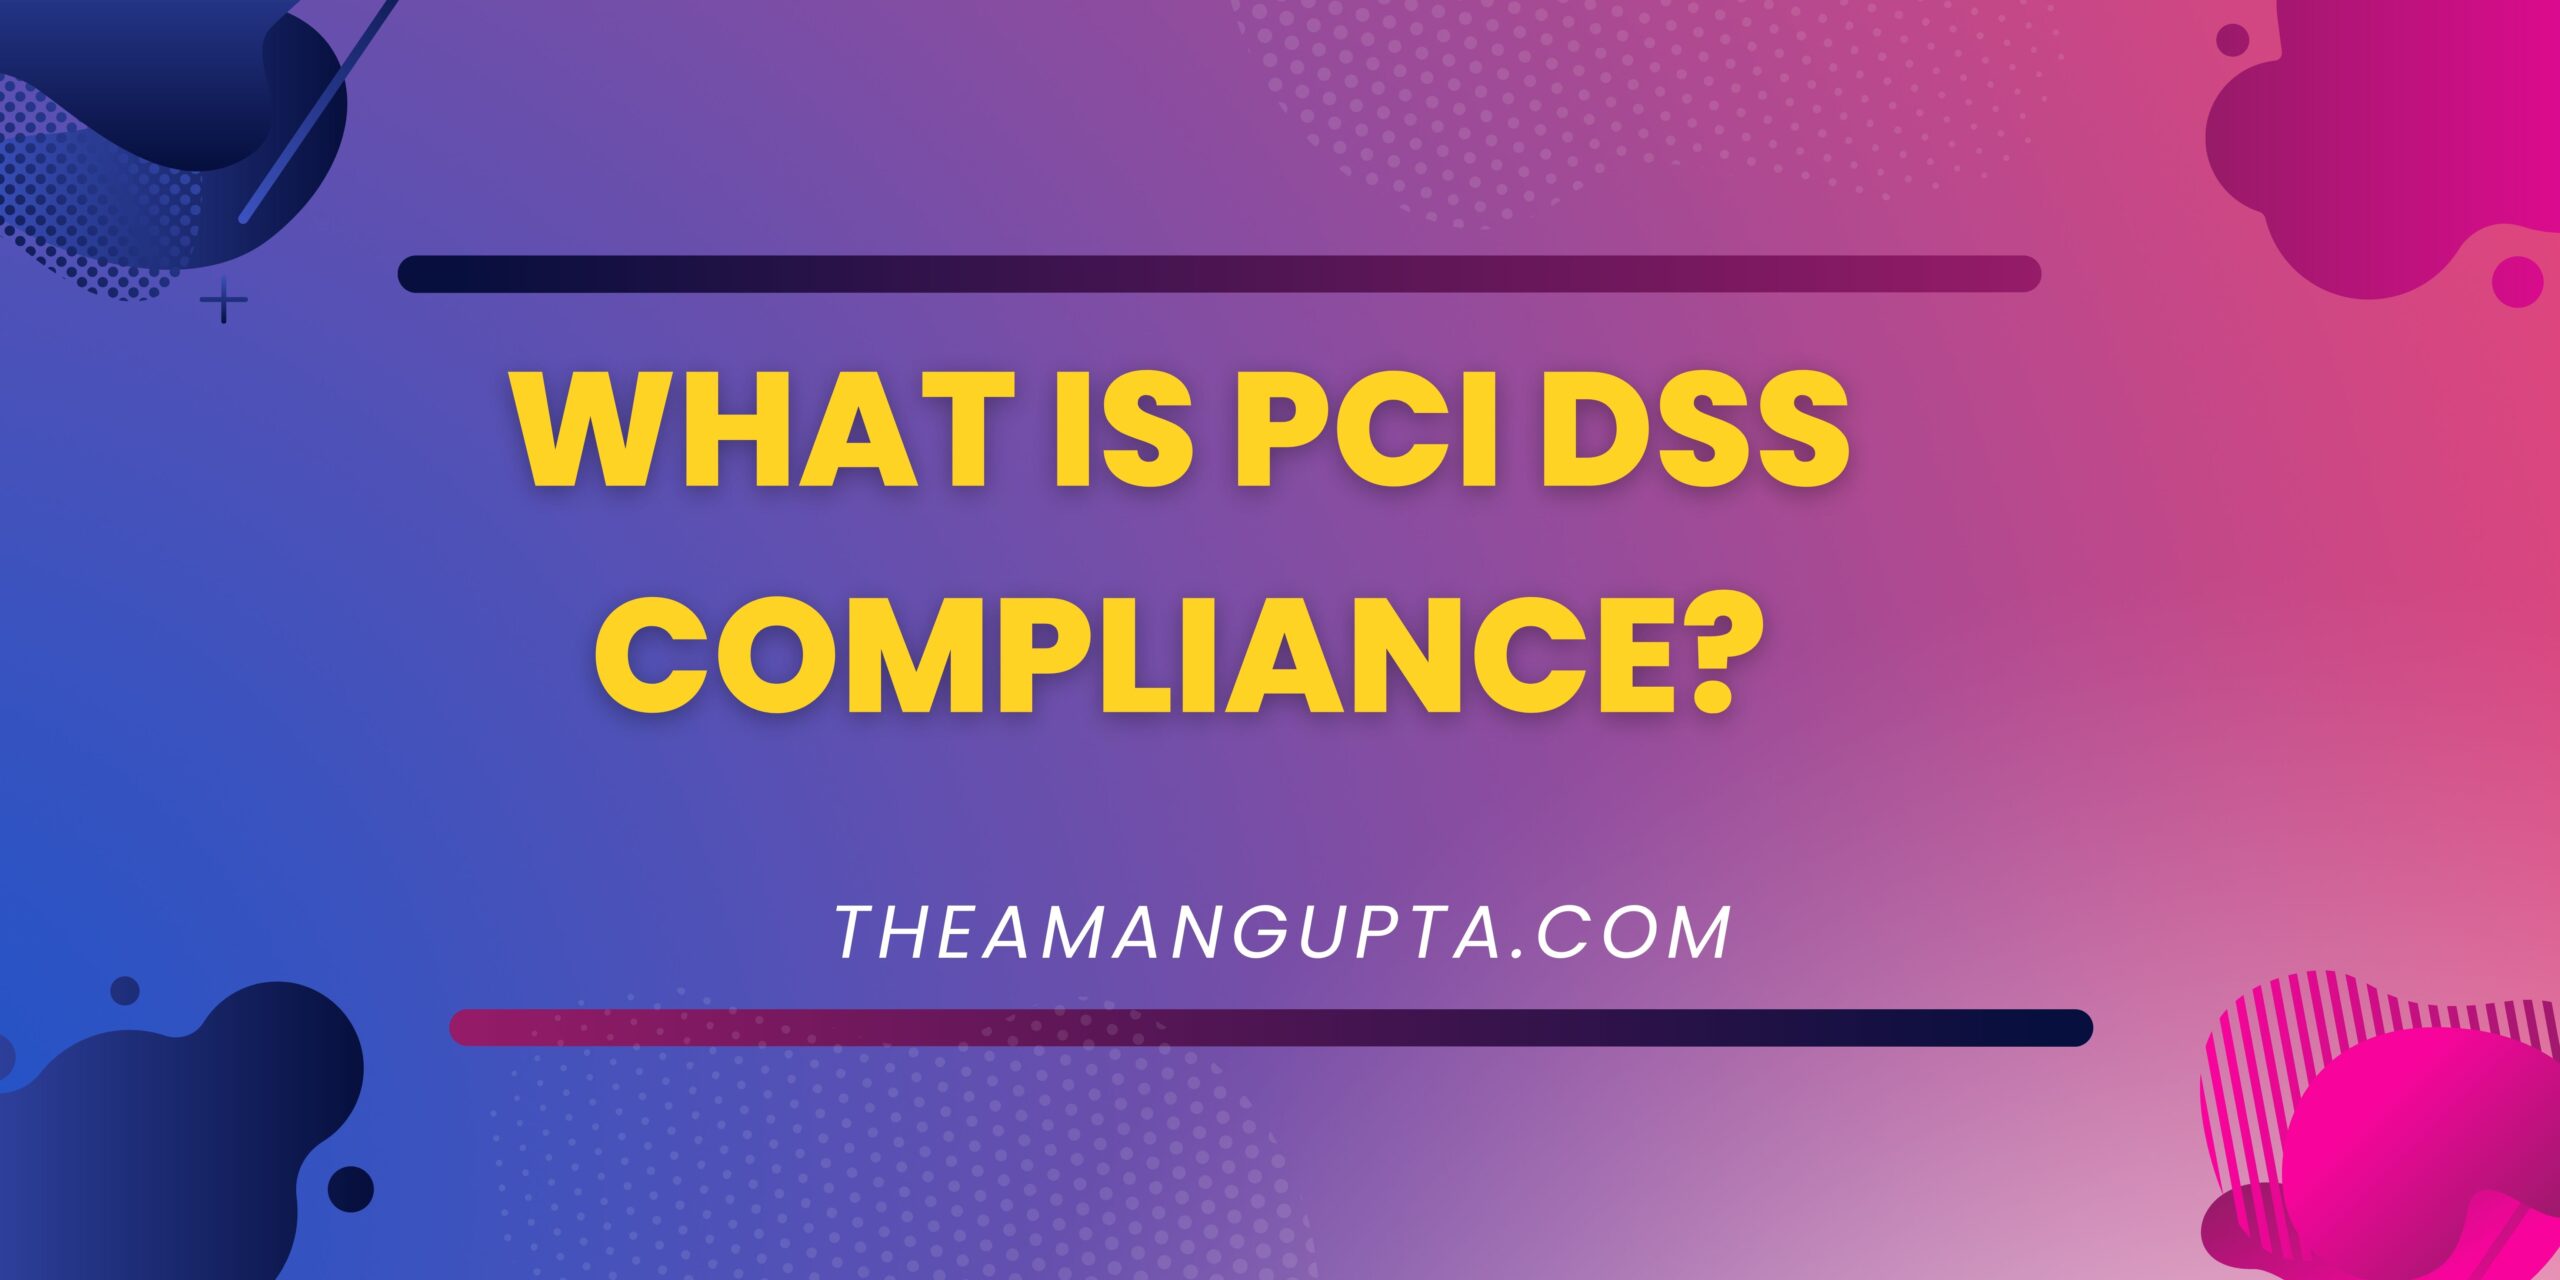 What Is PCI DSS Compliance|PCL DSS Compliance|Theamangupta|Theamangupta